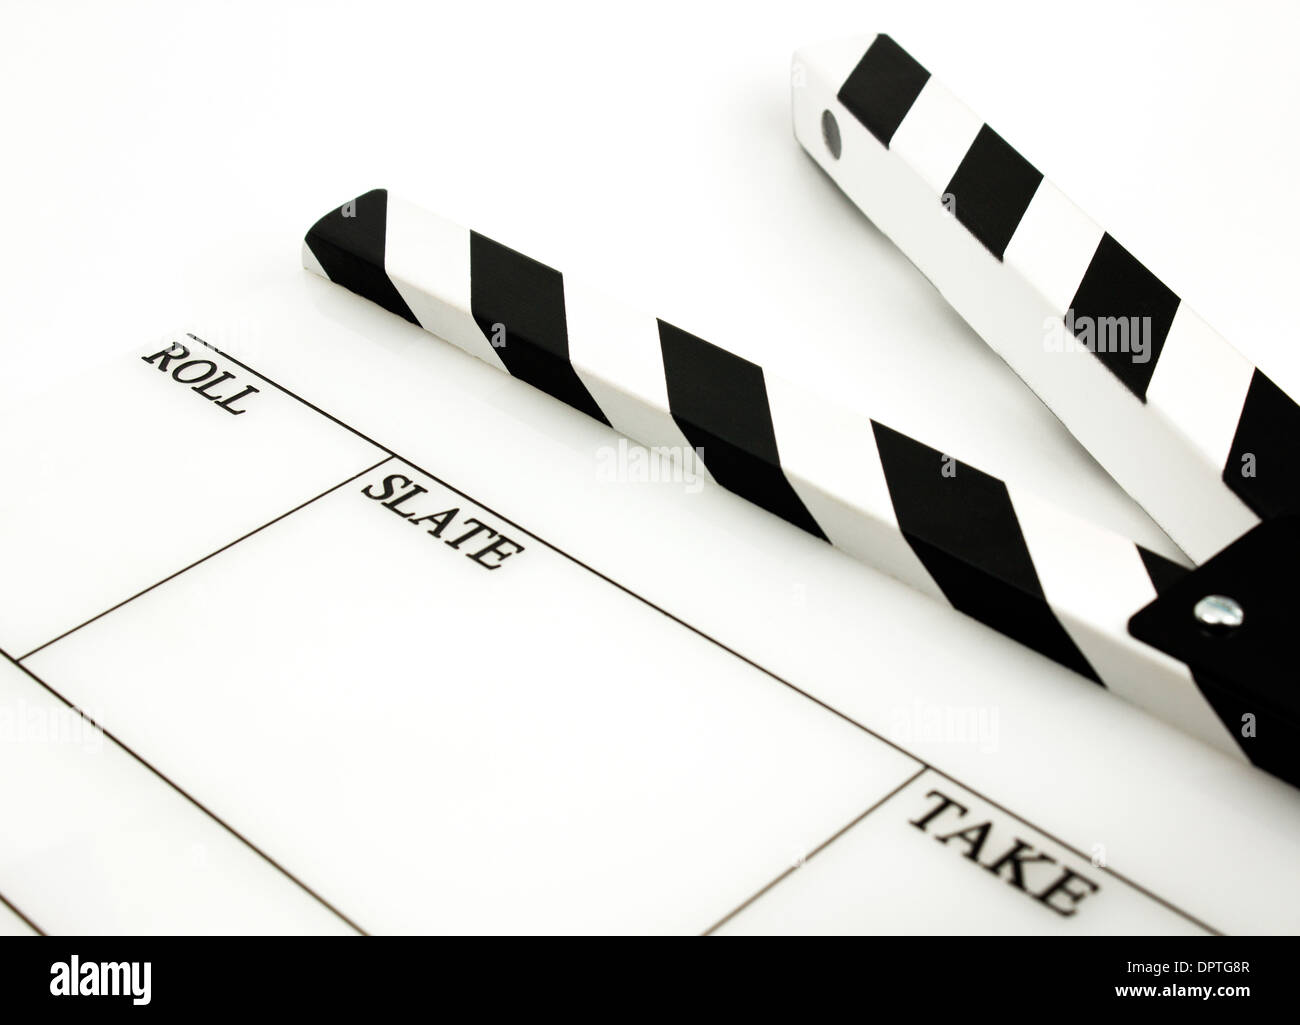 white vintage style clapboard can use like production symbol Stock Photo